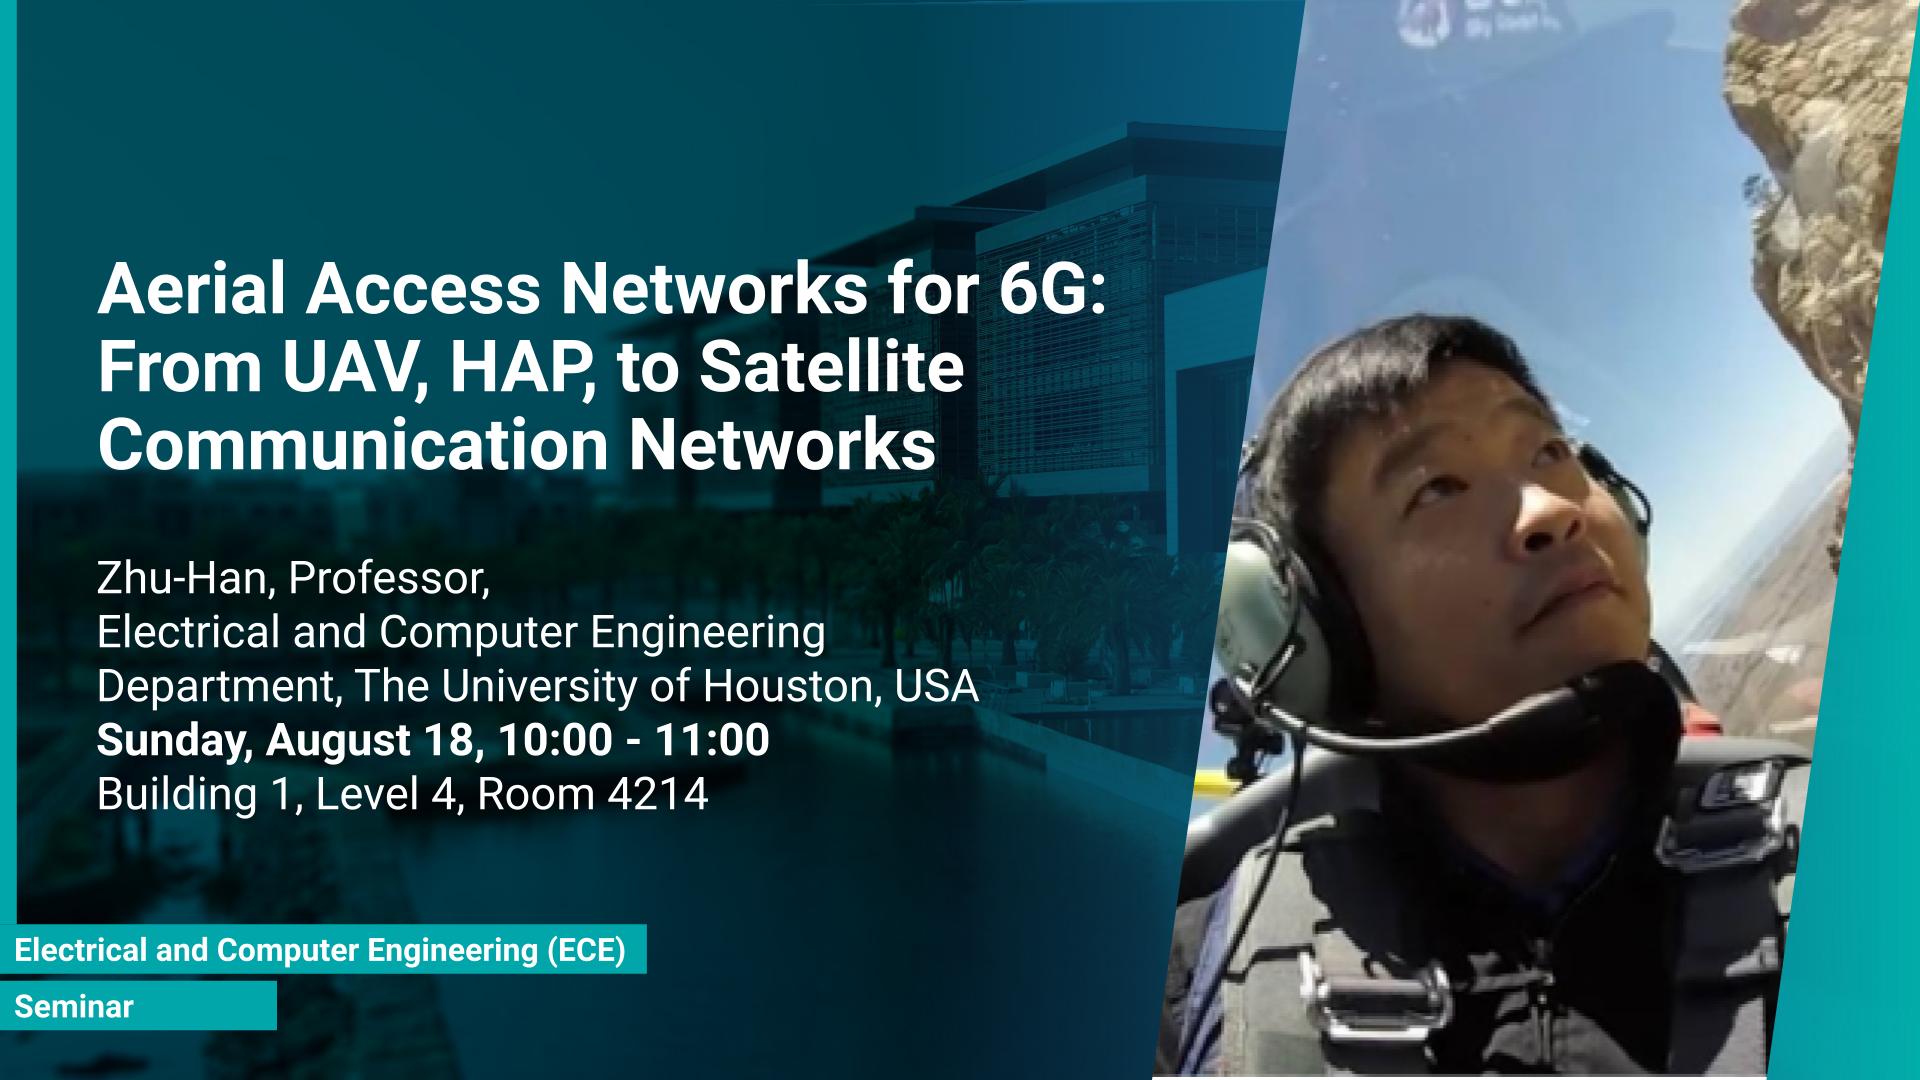 Aerial Access Networks for 6G: From UAV, HAP, to Satellite Communication Networks